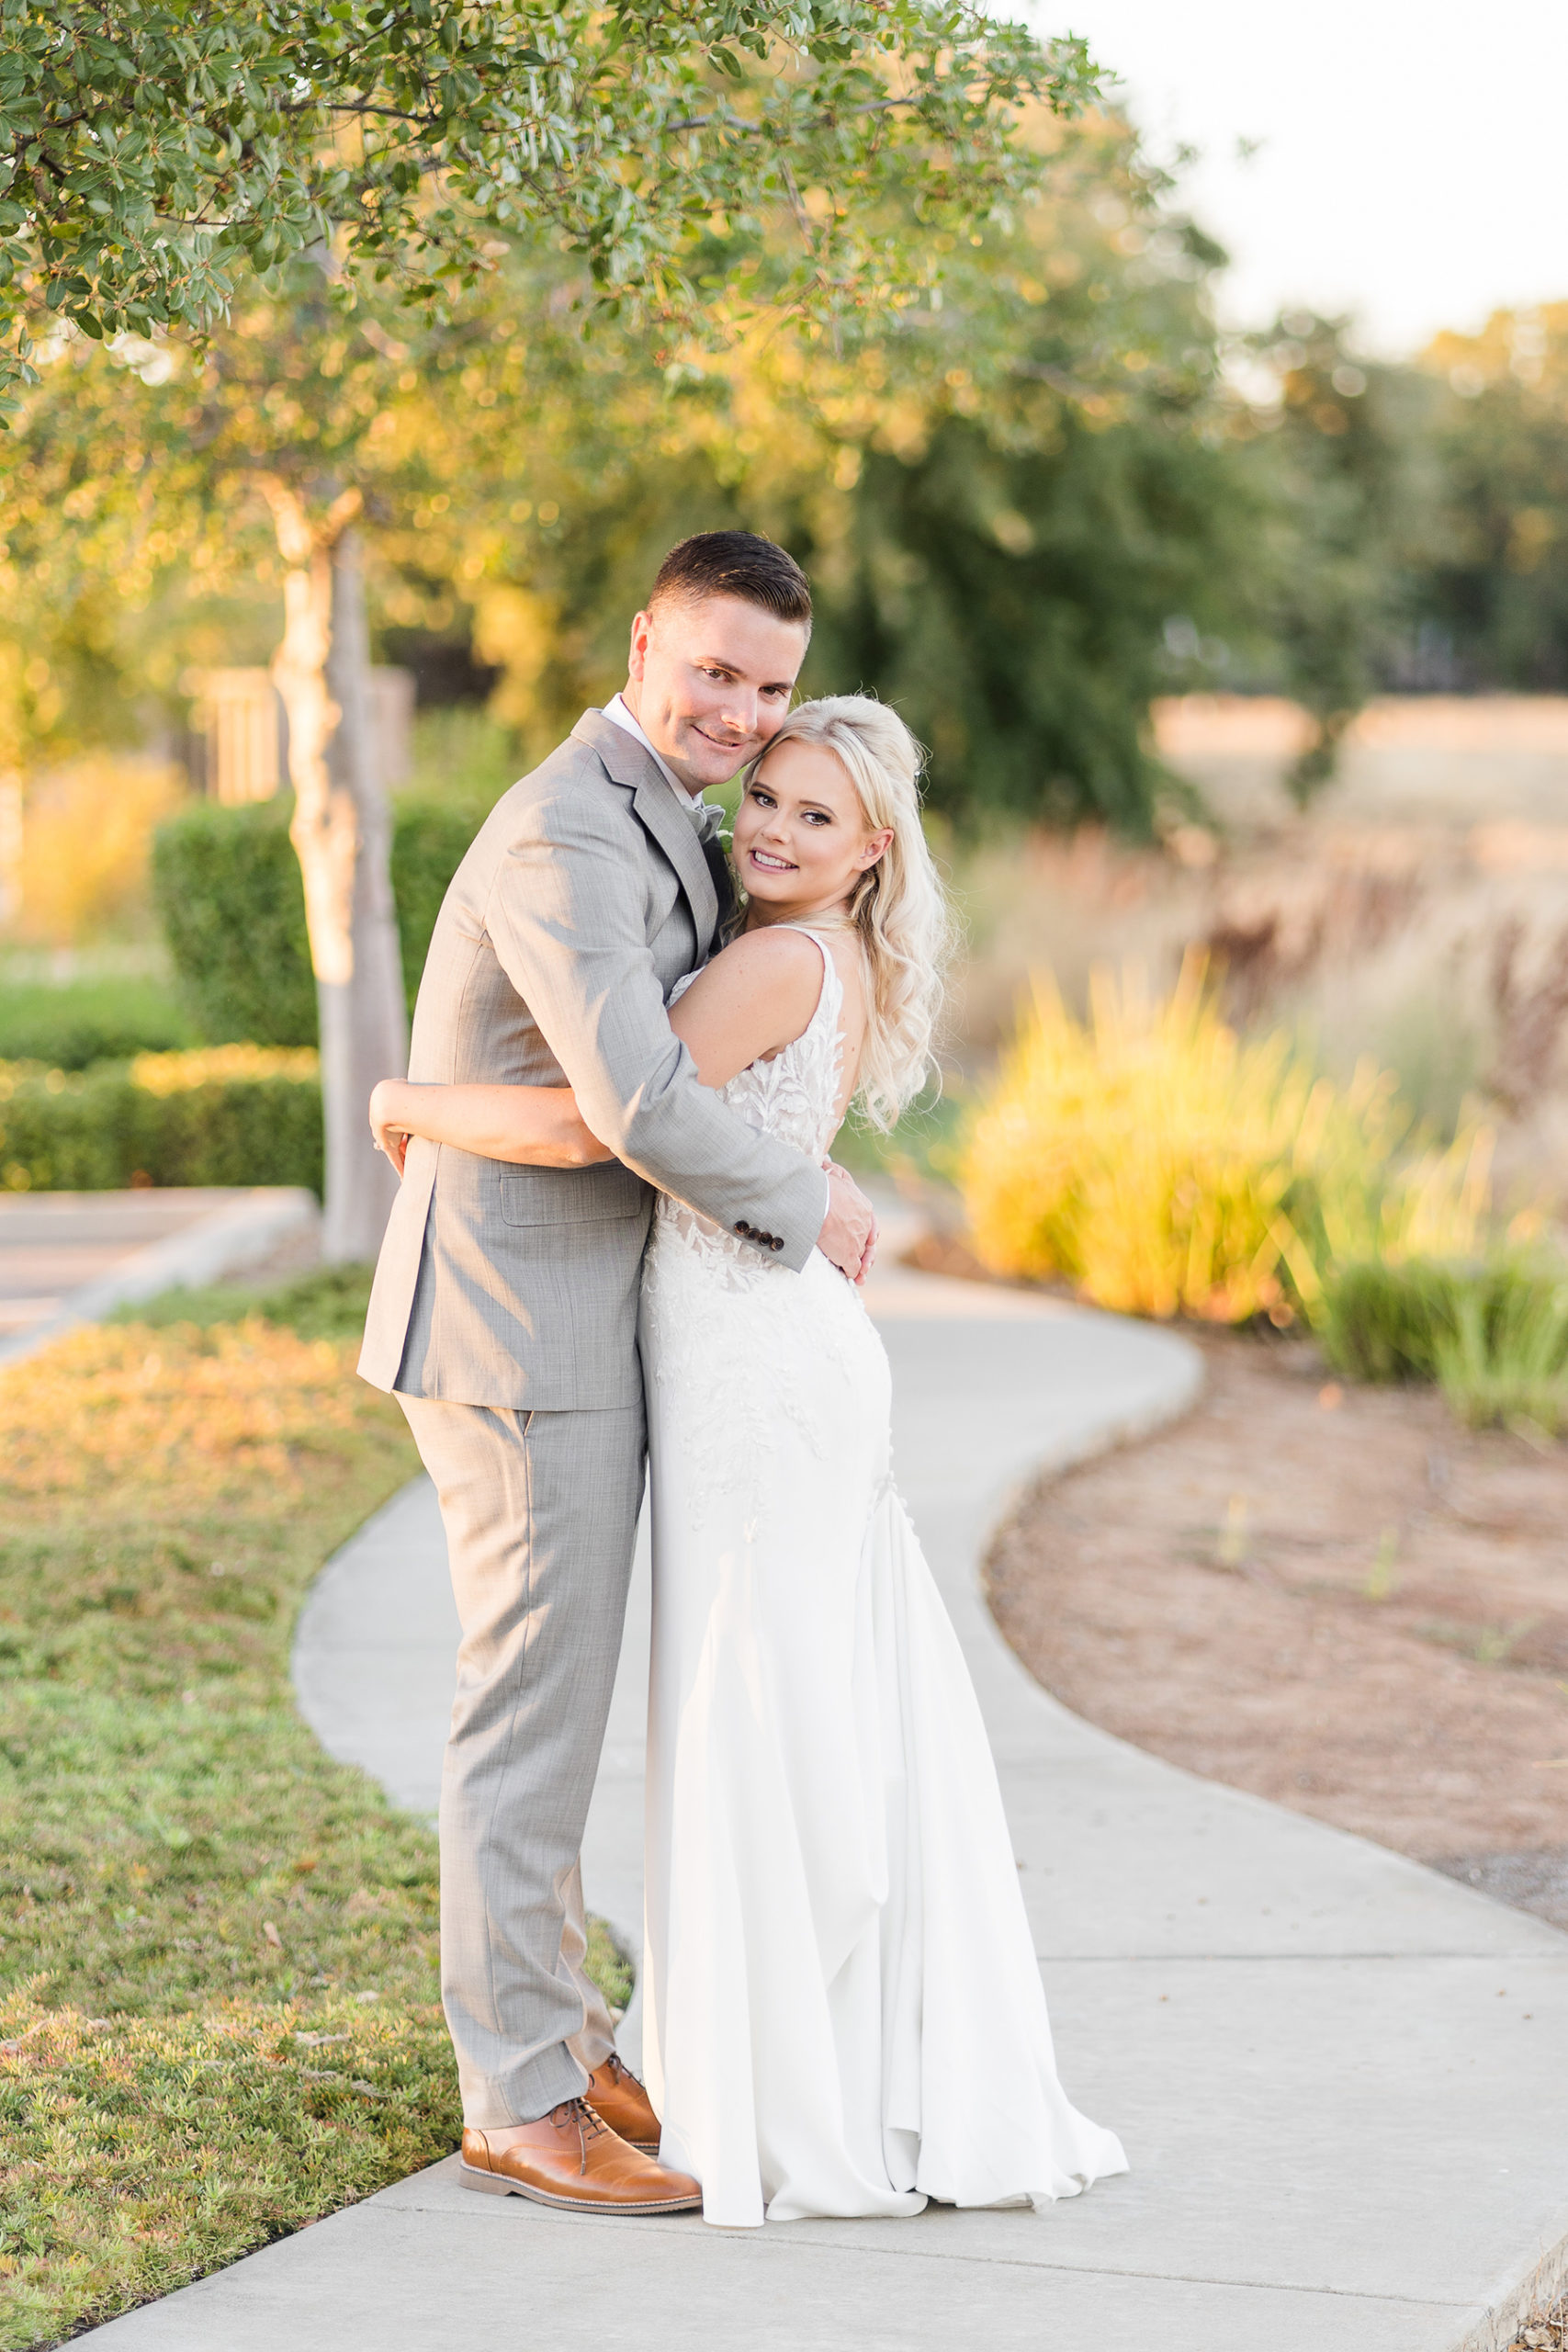 Elk Grove Evergreen Springs Wedding Sunset Bride and Groom Photos by Adrienne and Dani Photography